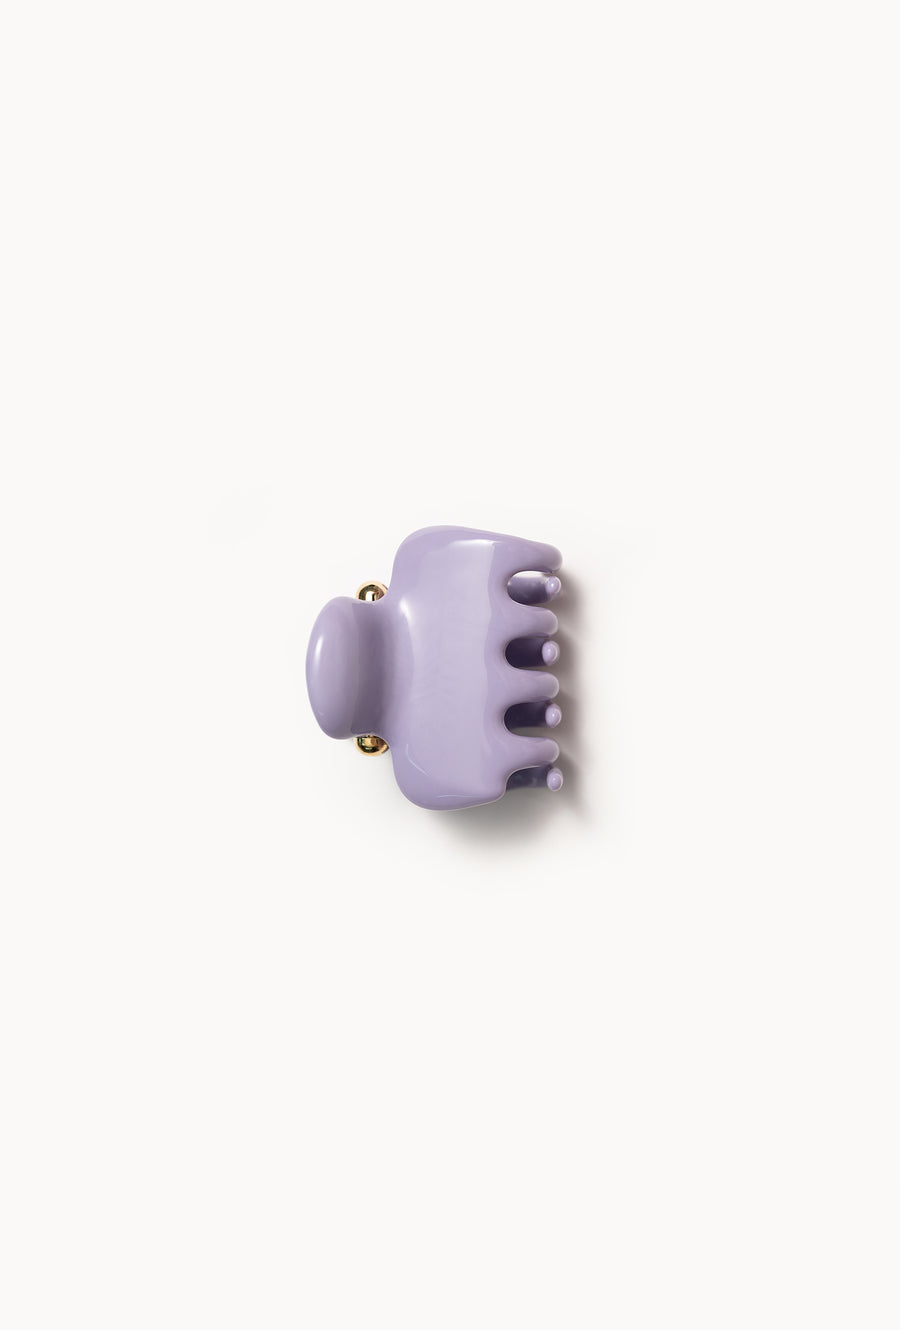 The Claw Clip is back and quintessential for all carefree hair days. Handmade in Italy and crafted from the highest quality resin. 100% Recyclable. 1.5" claw clip from Undo Hairware sold at Thread Spun.